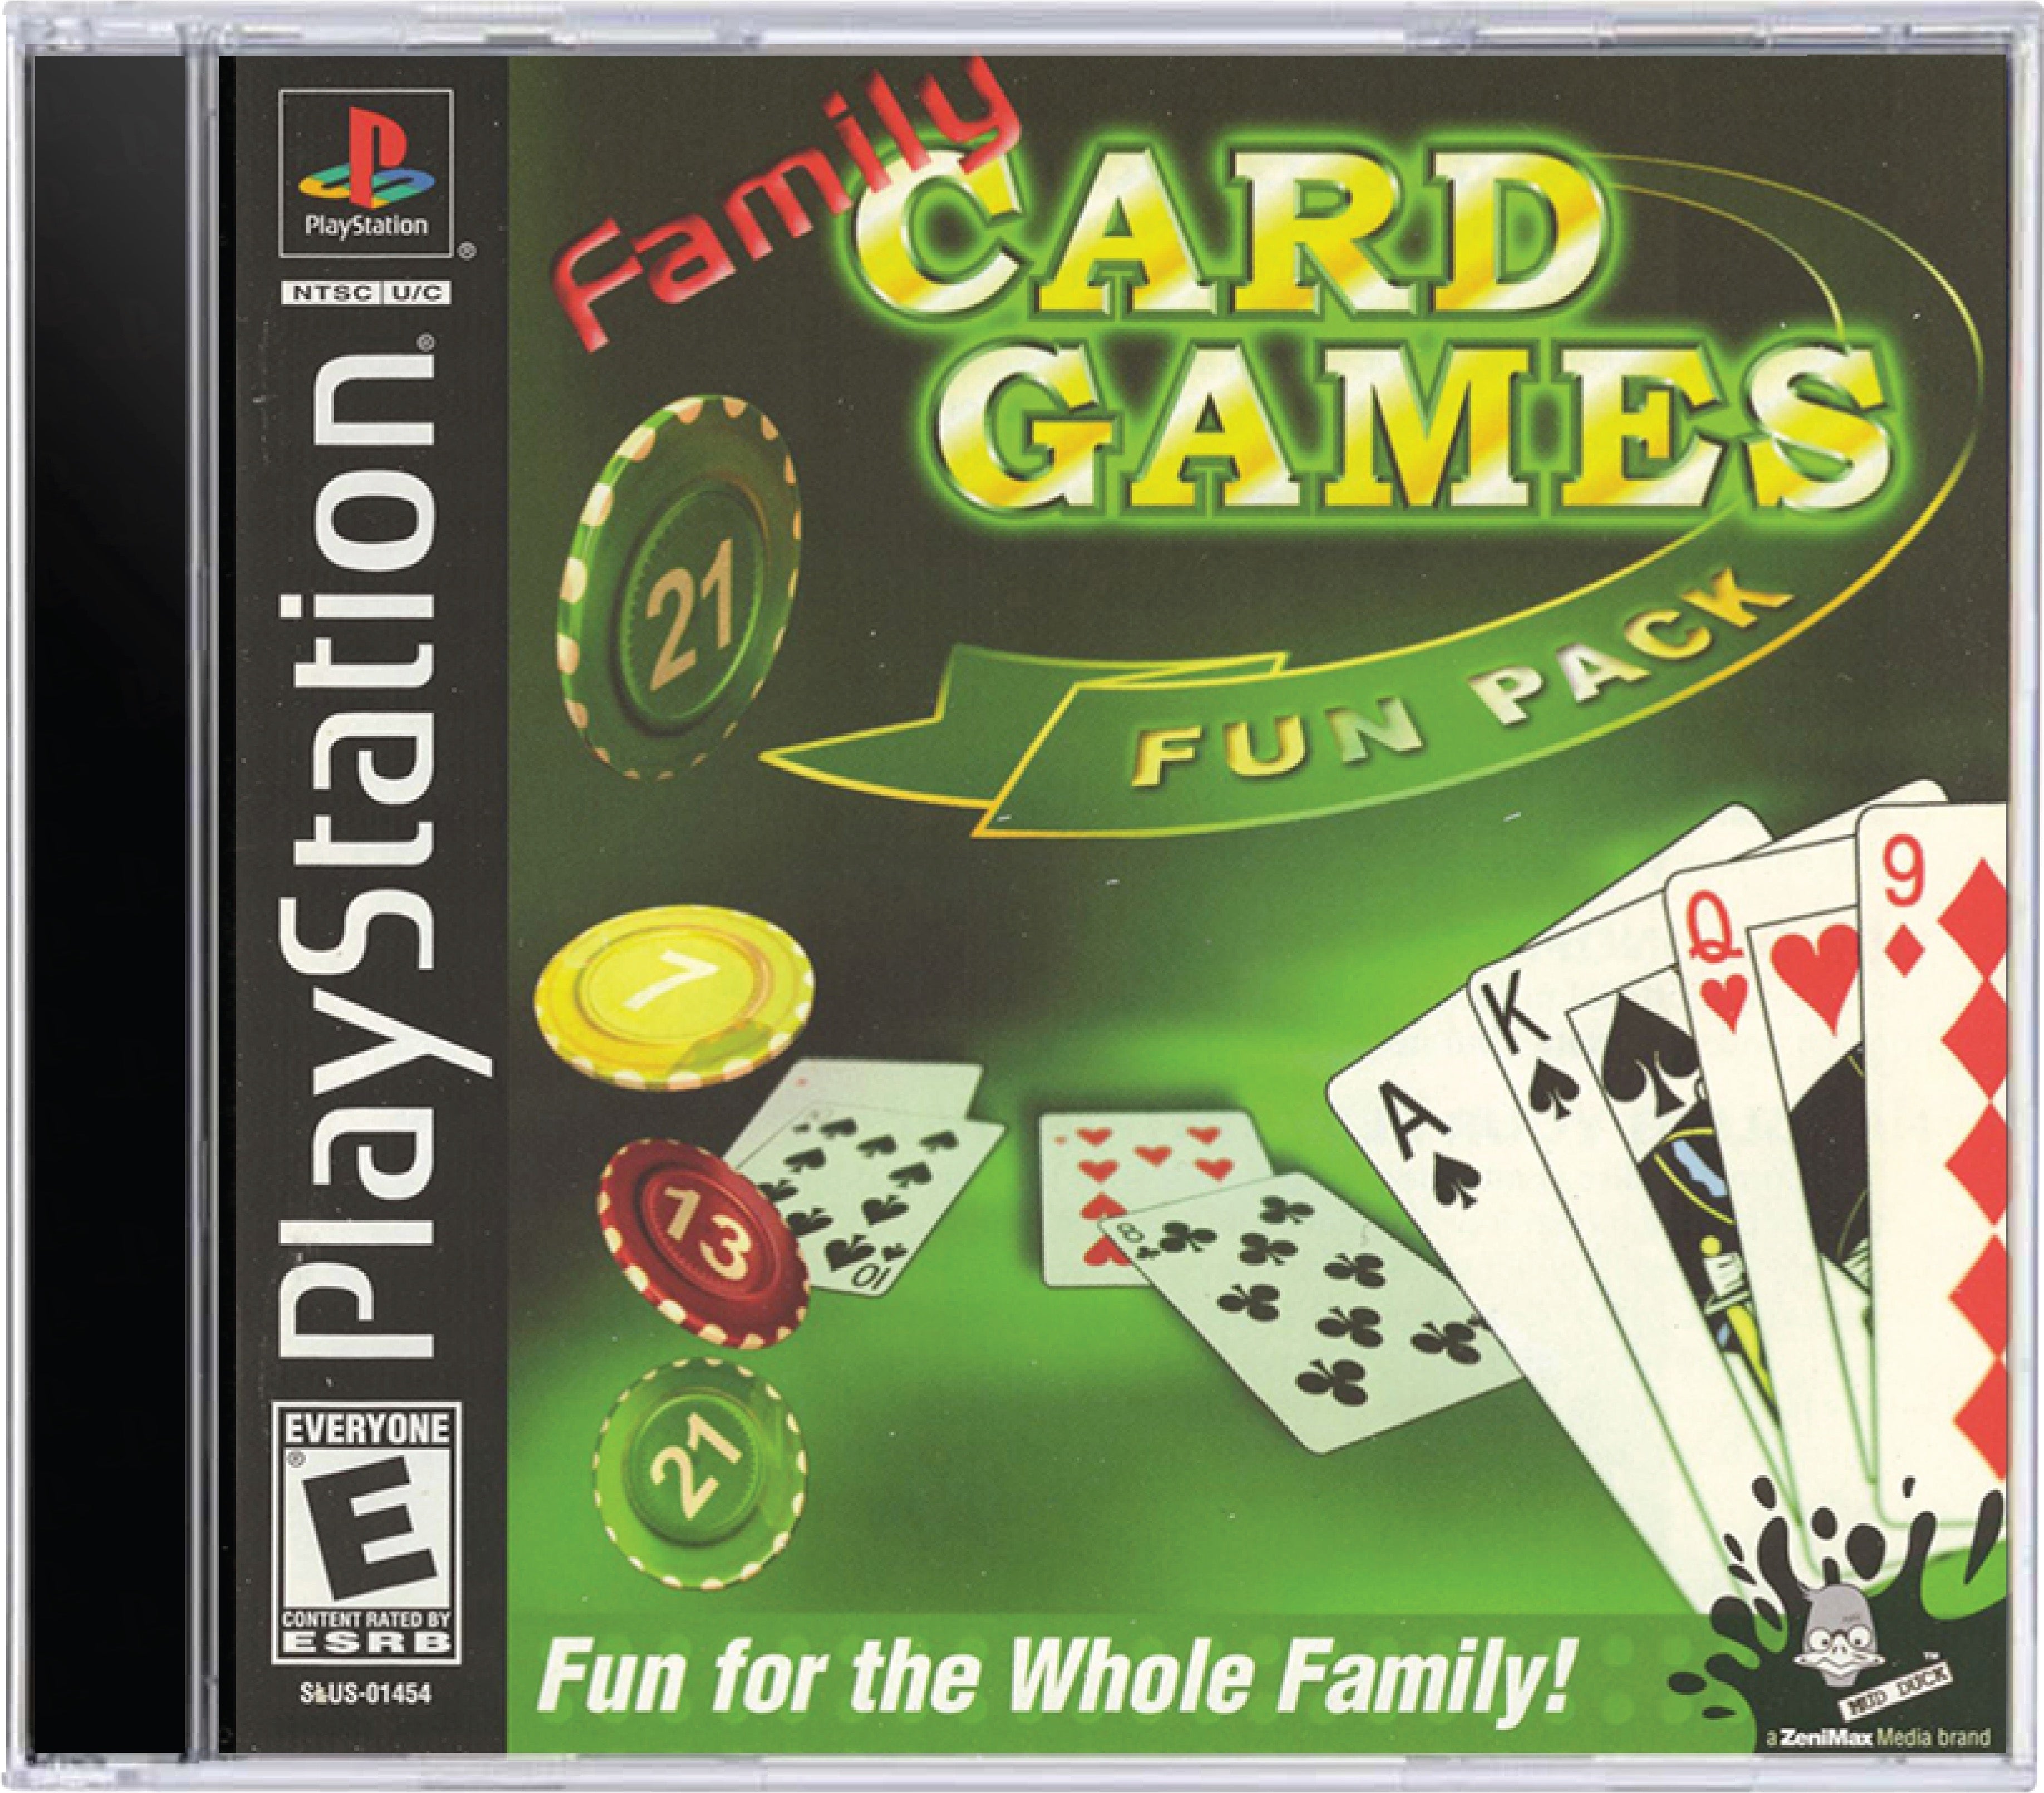 Family Card Games Fun Pack Cover Art and Product Photo